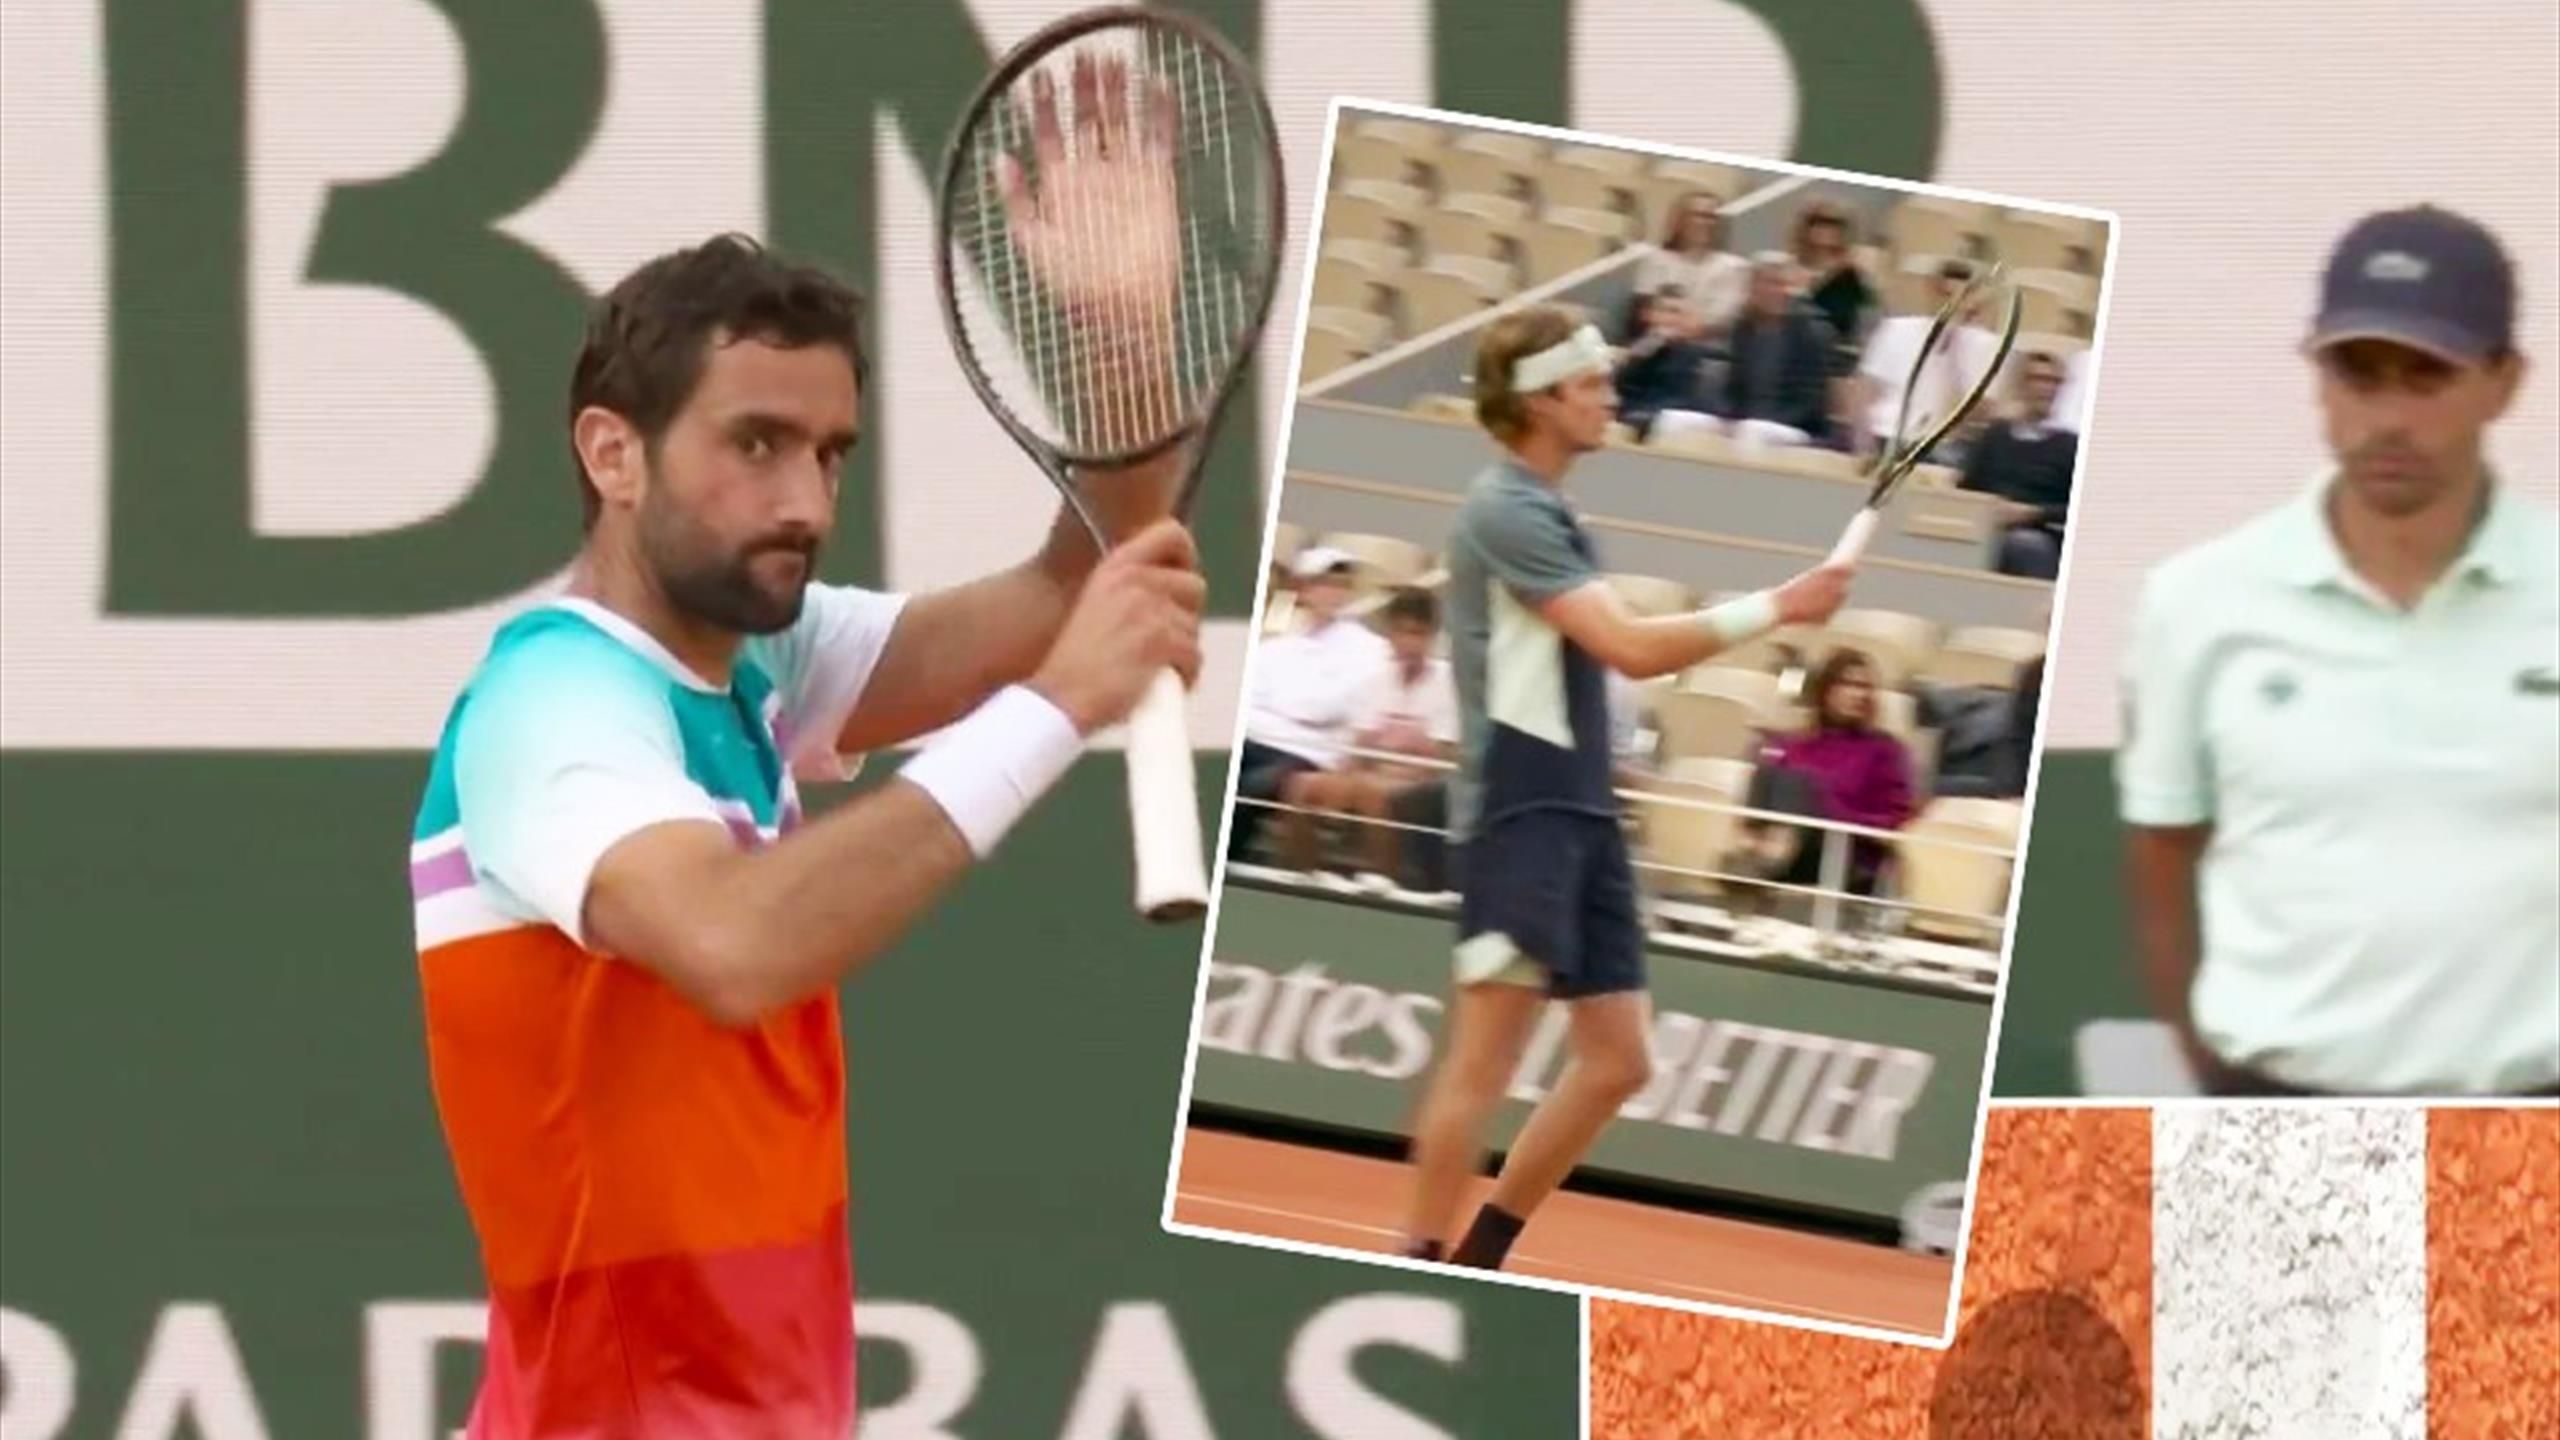 Watch amazing act of sportsmanship from Andrey Rublev as Marin Cilic applauds during French Open clash - Tennis video